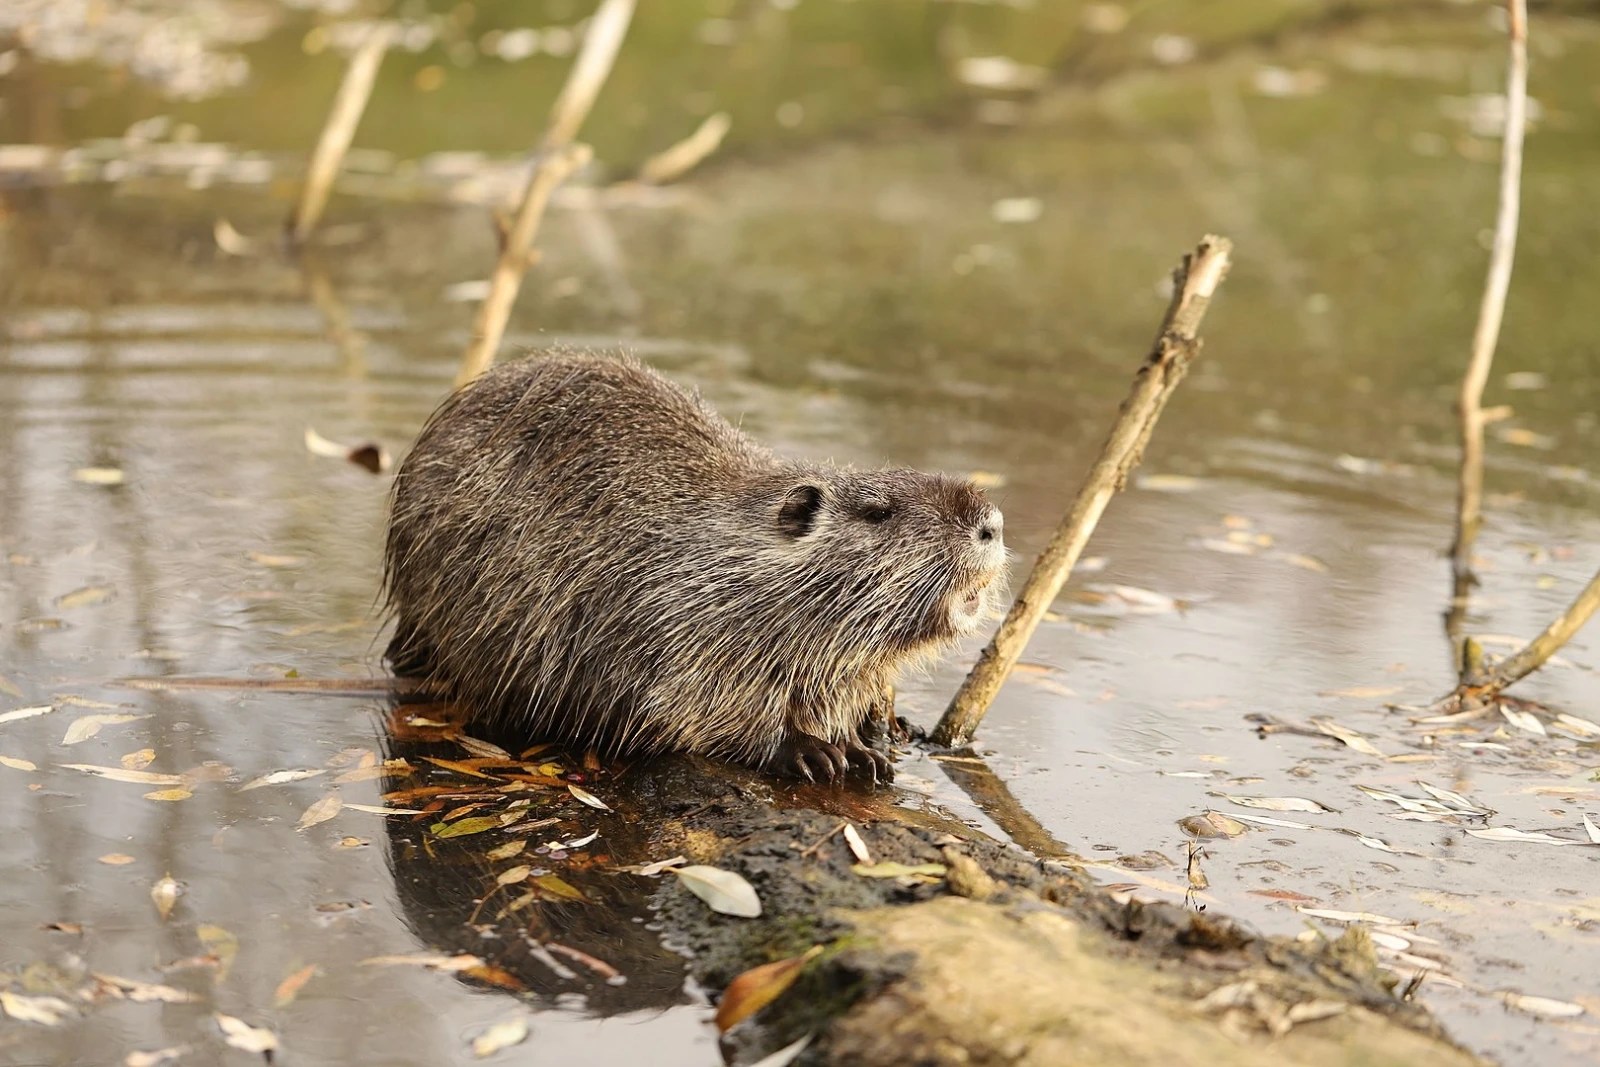 A nutria, one of the mammals, appeared sitting by the water's edge among fallen leaves and twigs.